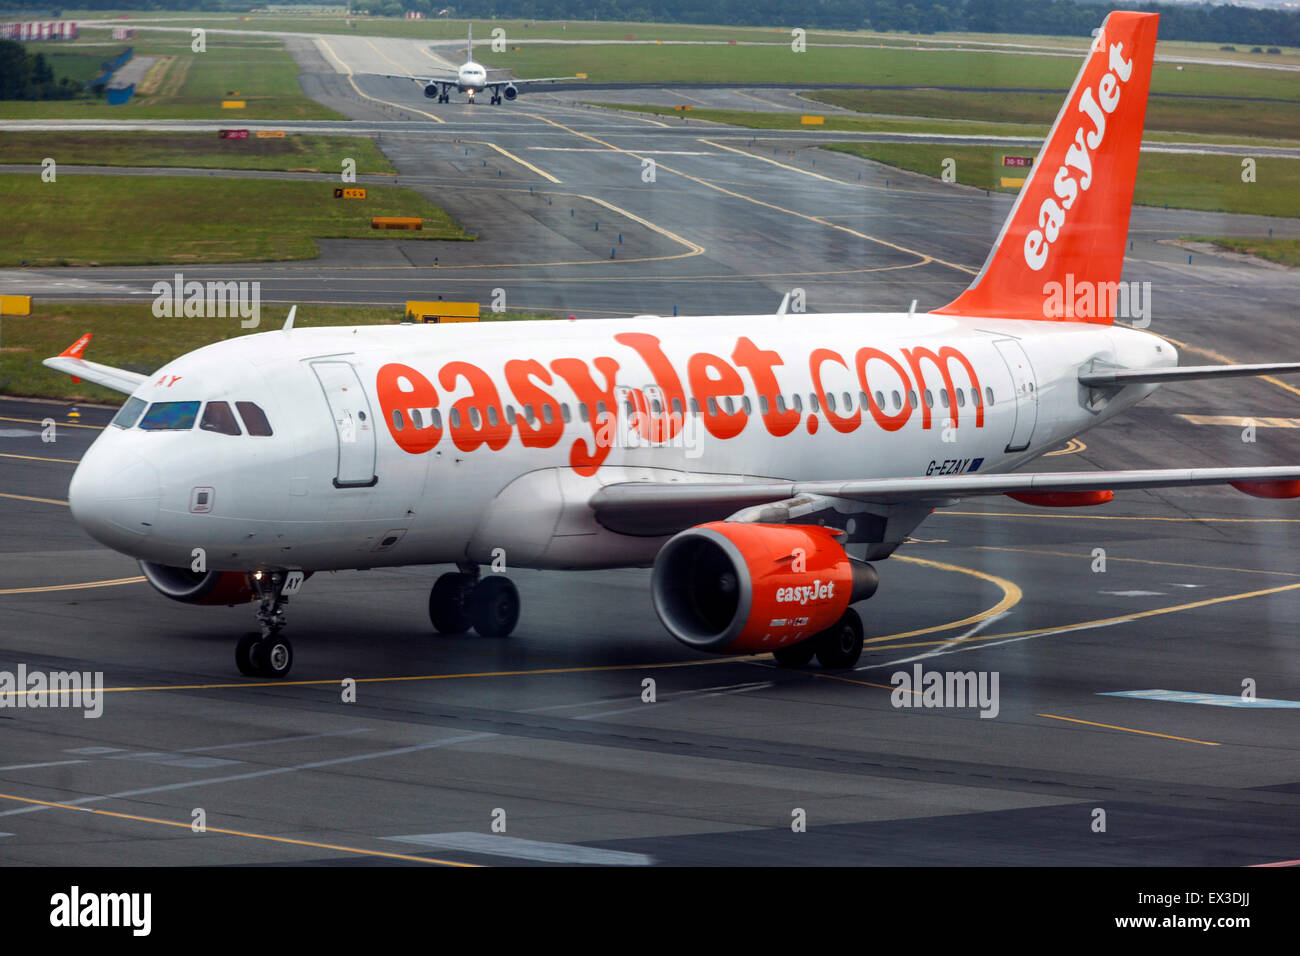 EasyJet plane taxiing Grounded on the runway, Prague, Czech Republic Stock Photo